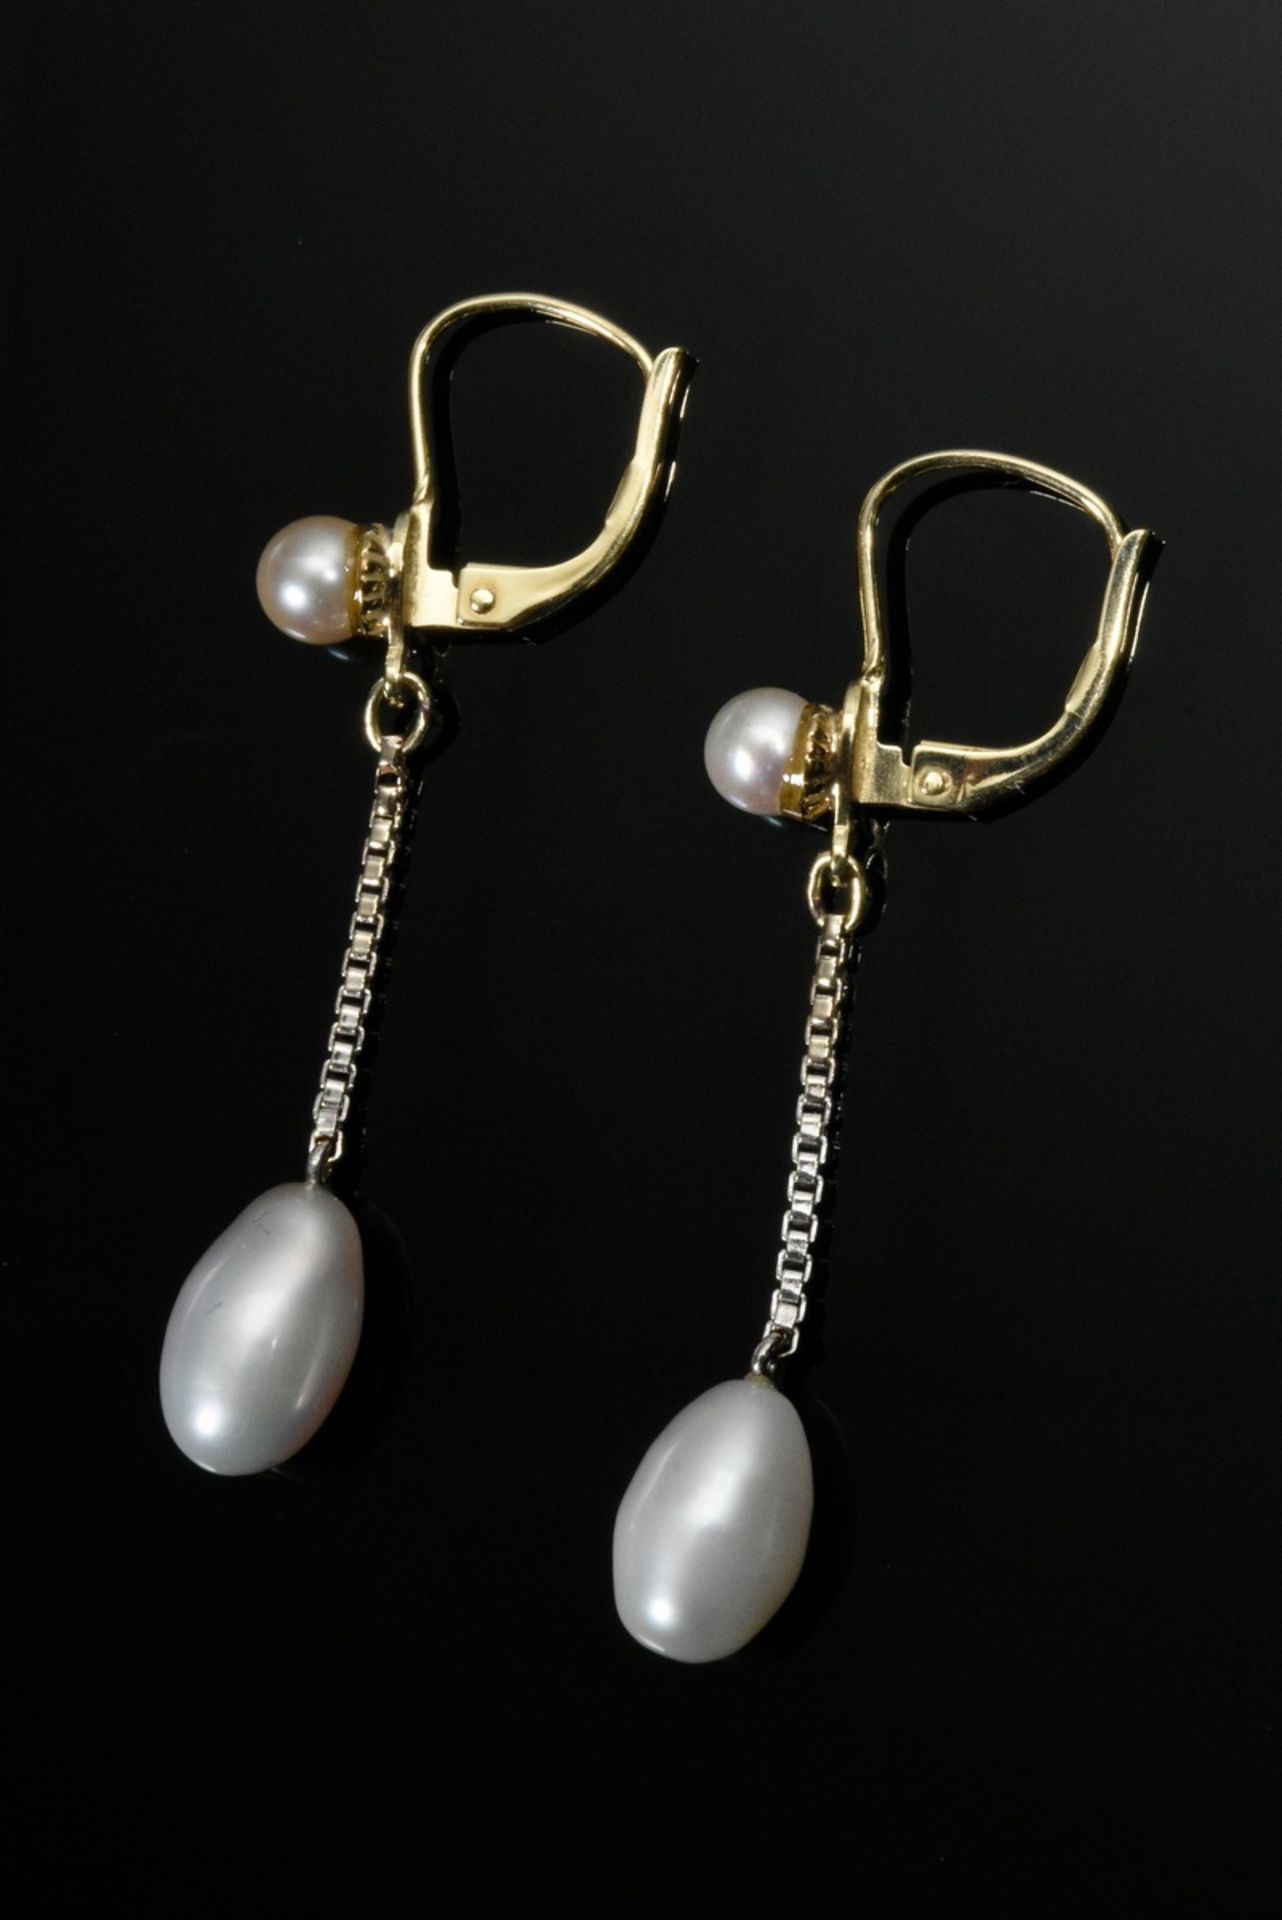 Pair of yellow gold 585 earrings with Akoya and Biwa pearls, 2.7g, l. 4.3cm - Image 2 of 2